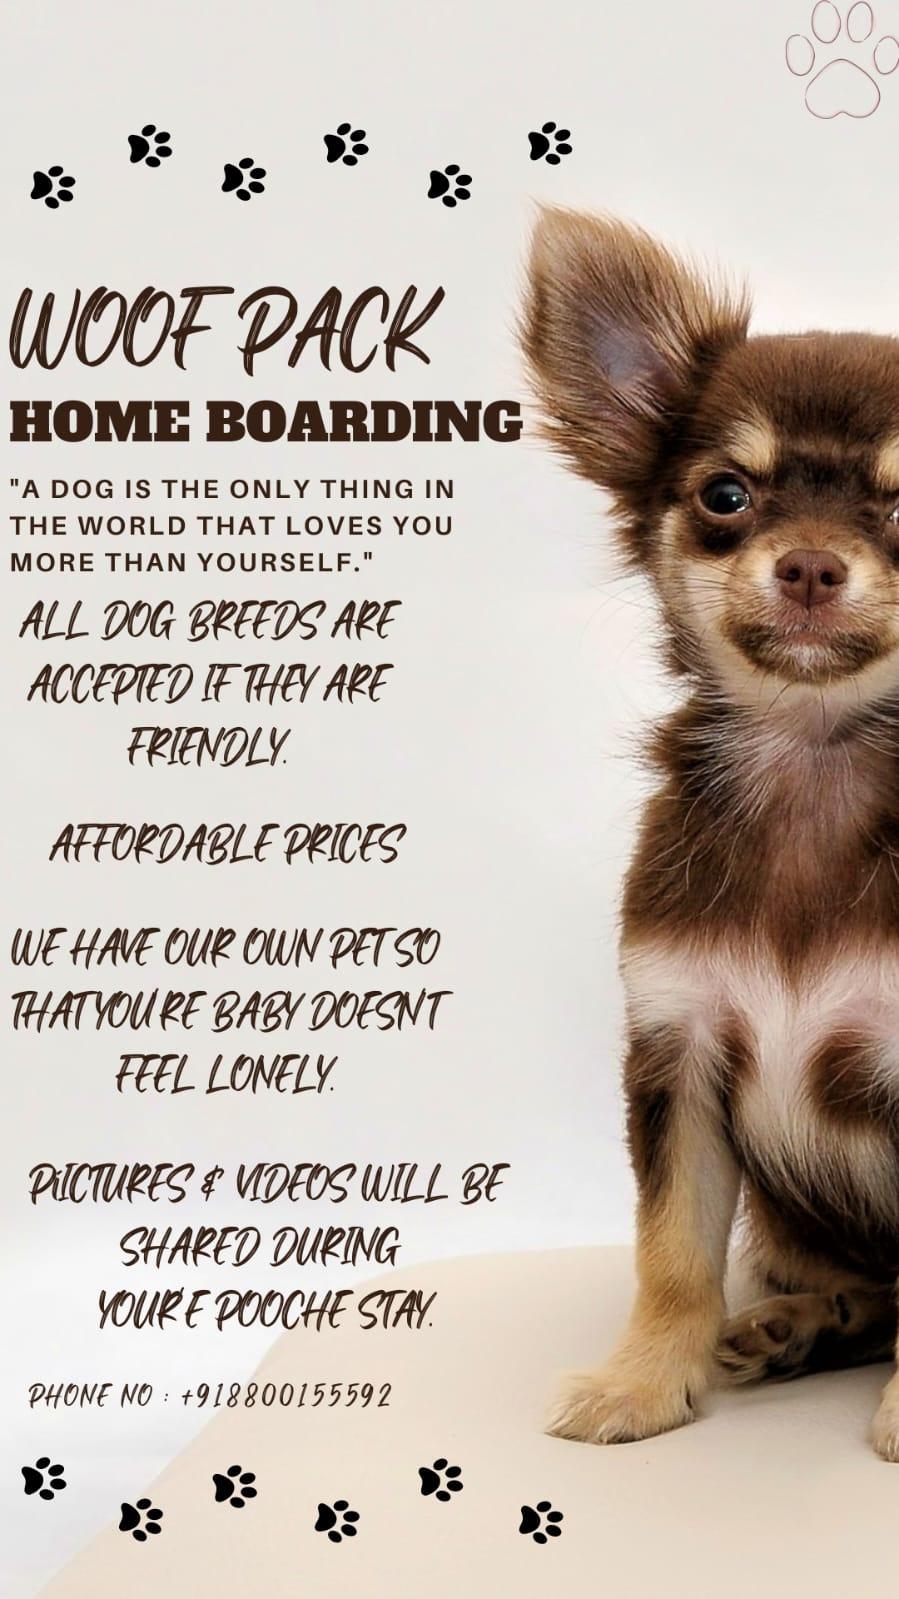 Woof Pack home Boarding for dogs